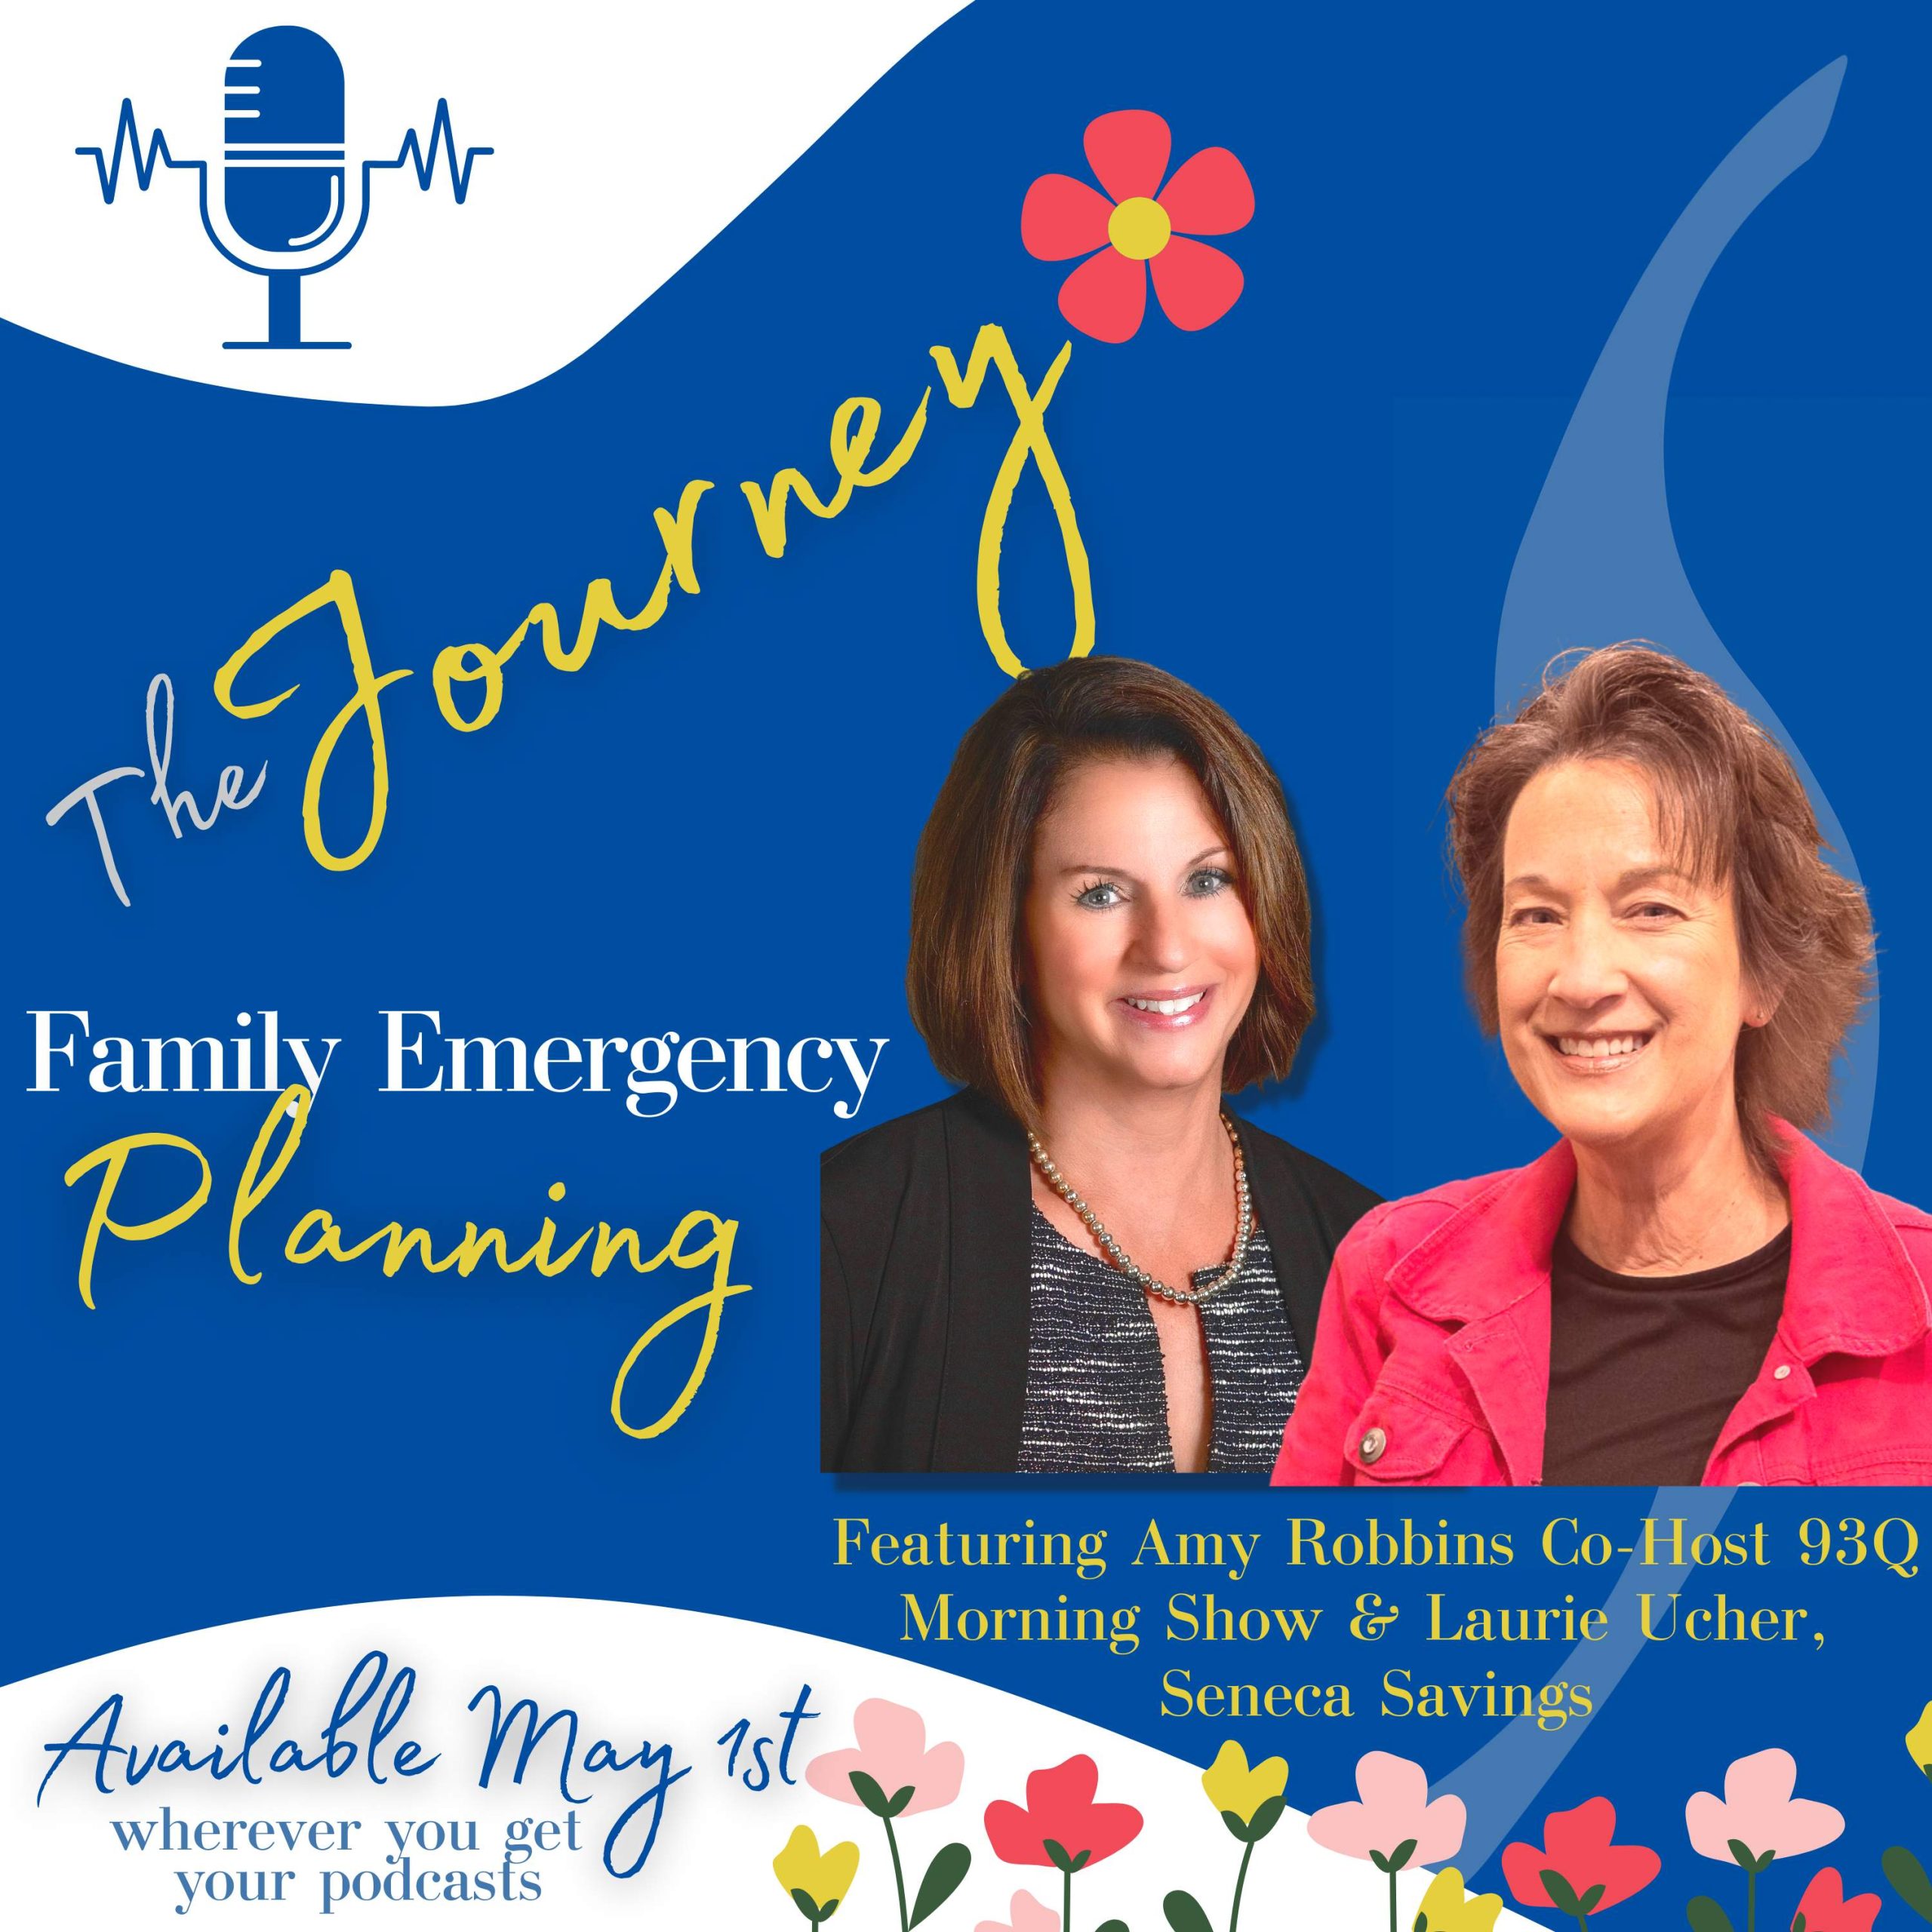 the journey podcast with amy robbins of 93Q and Seneca Savings